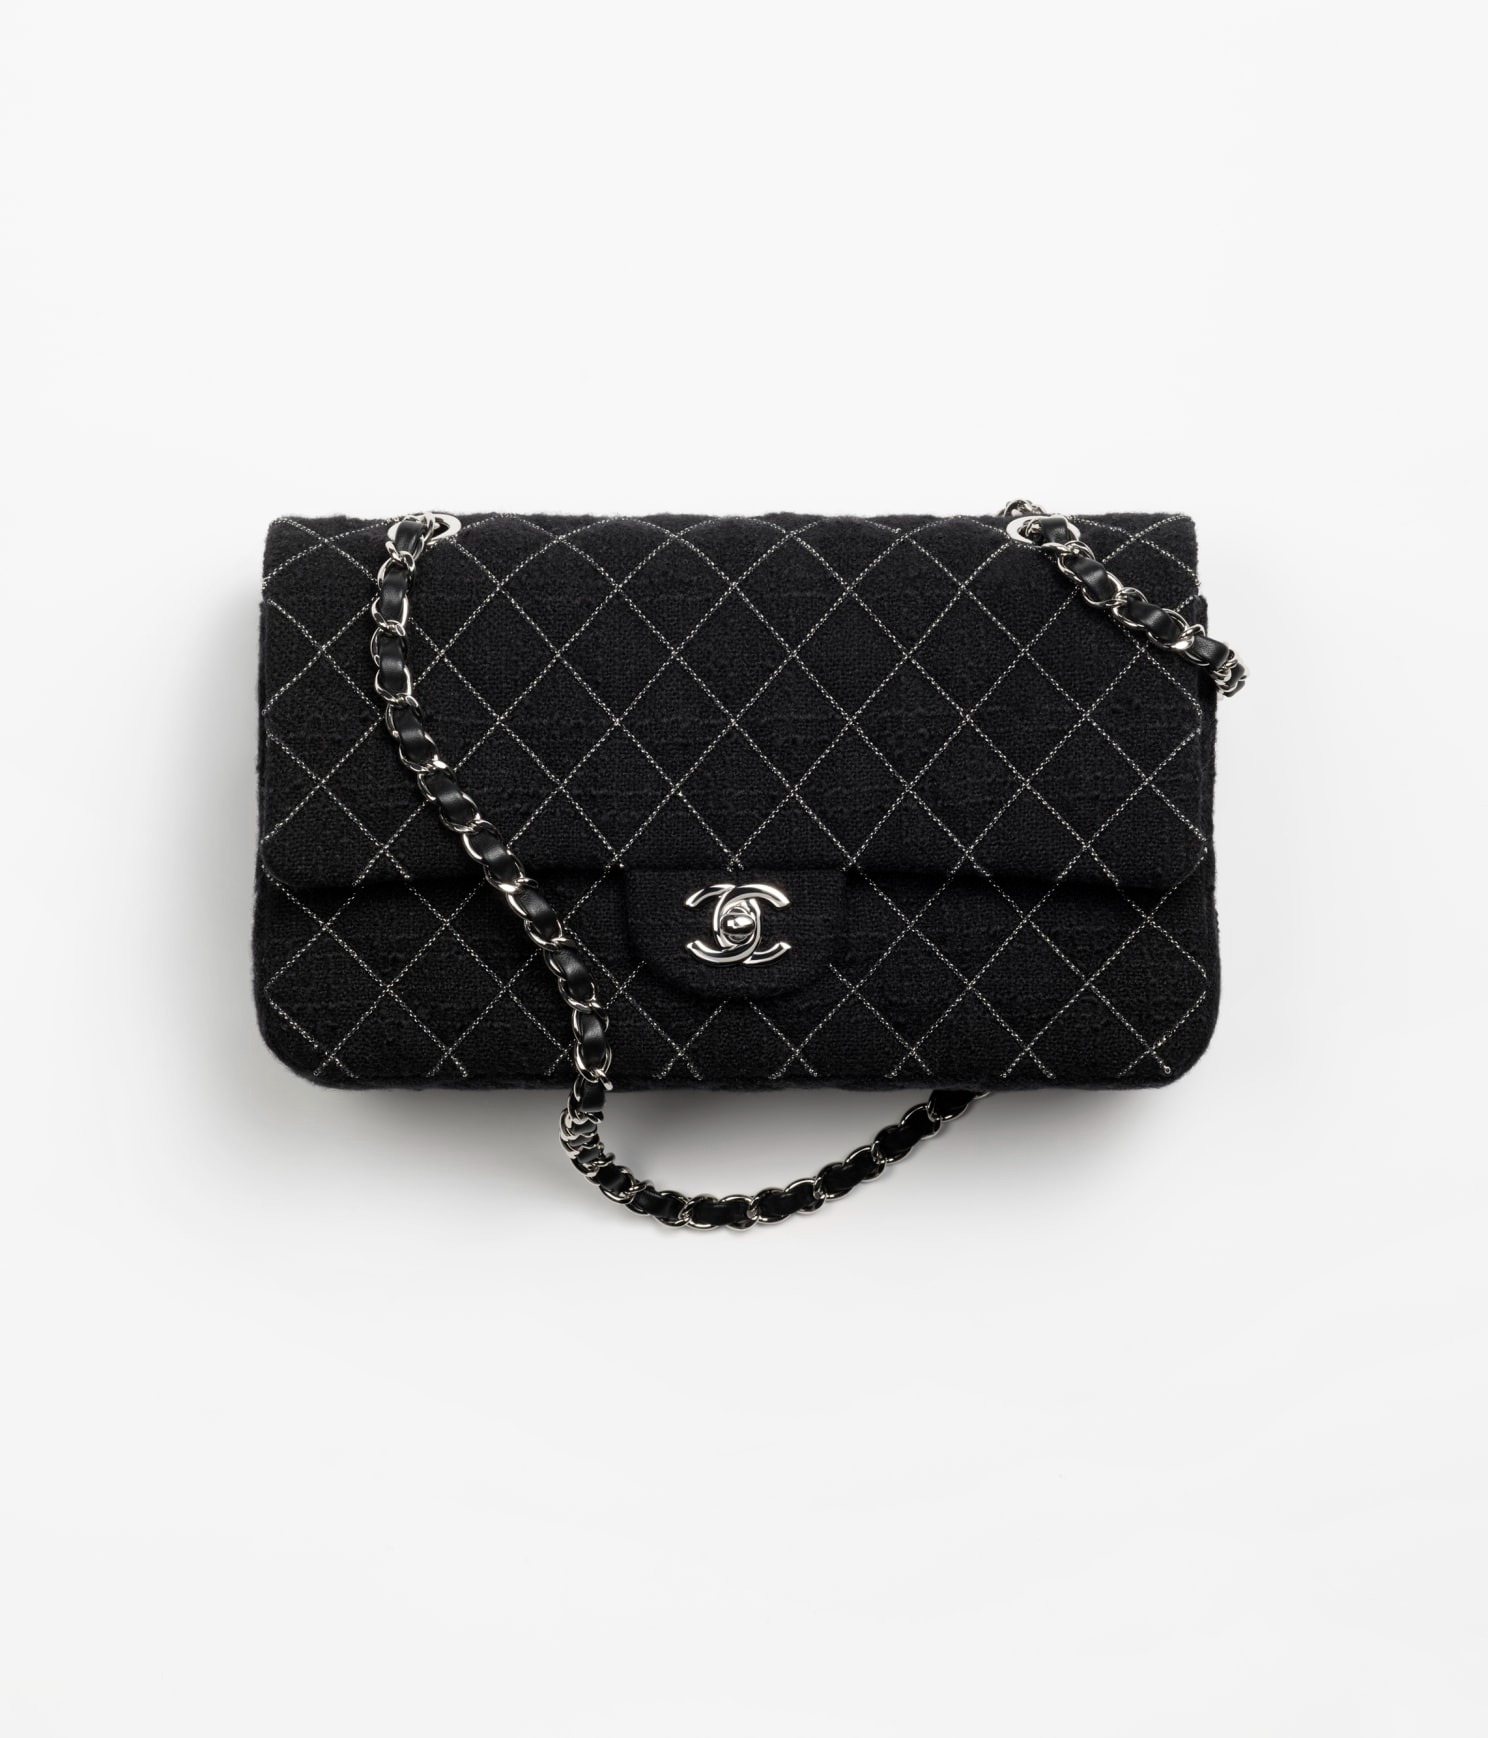 3 Best Chanel Bags 2023: Editor-Tested & Reviewed Chanel Bags